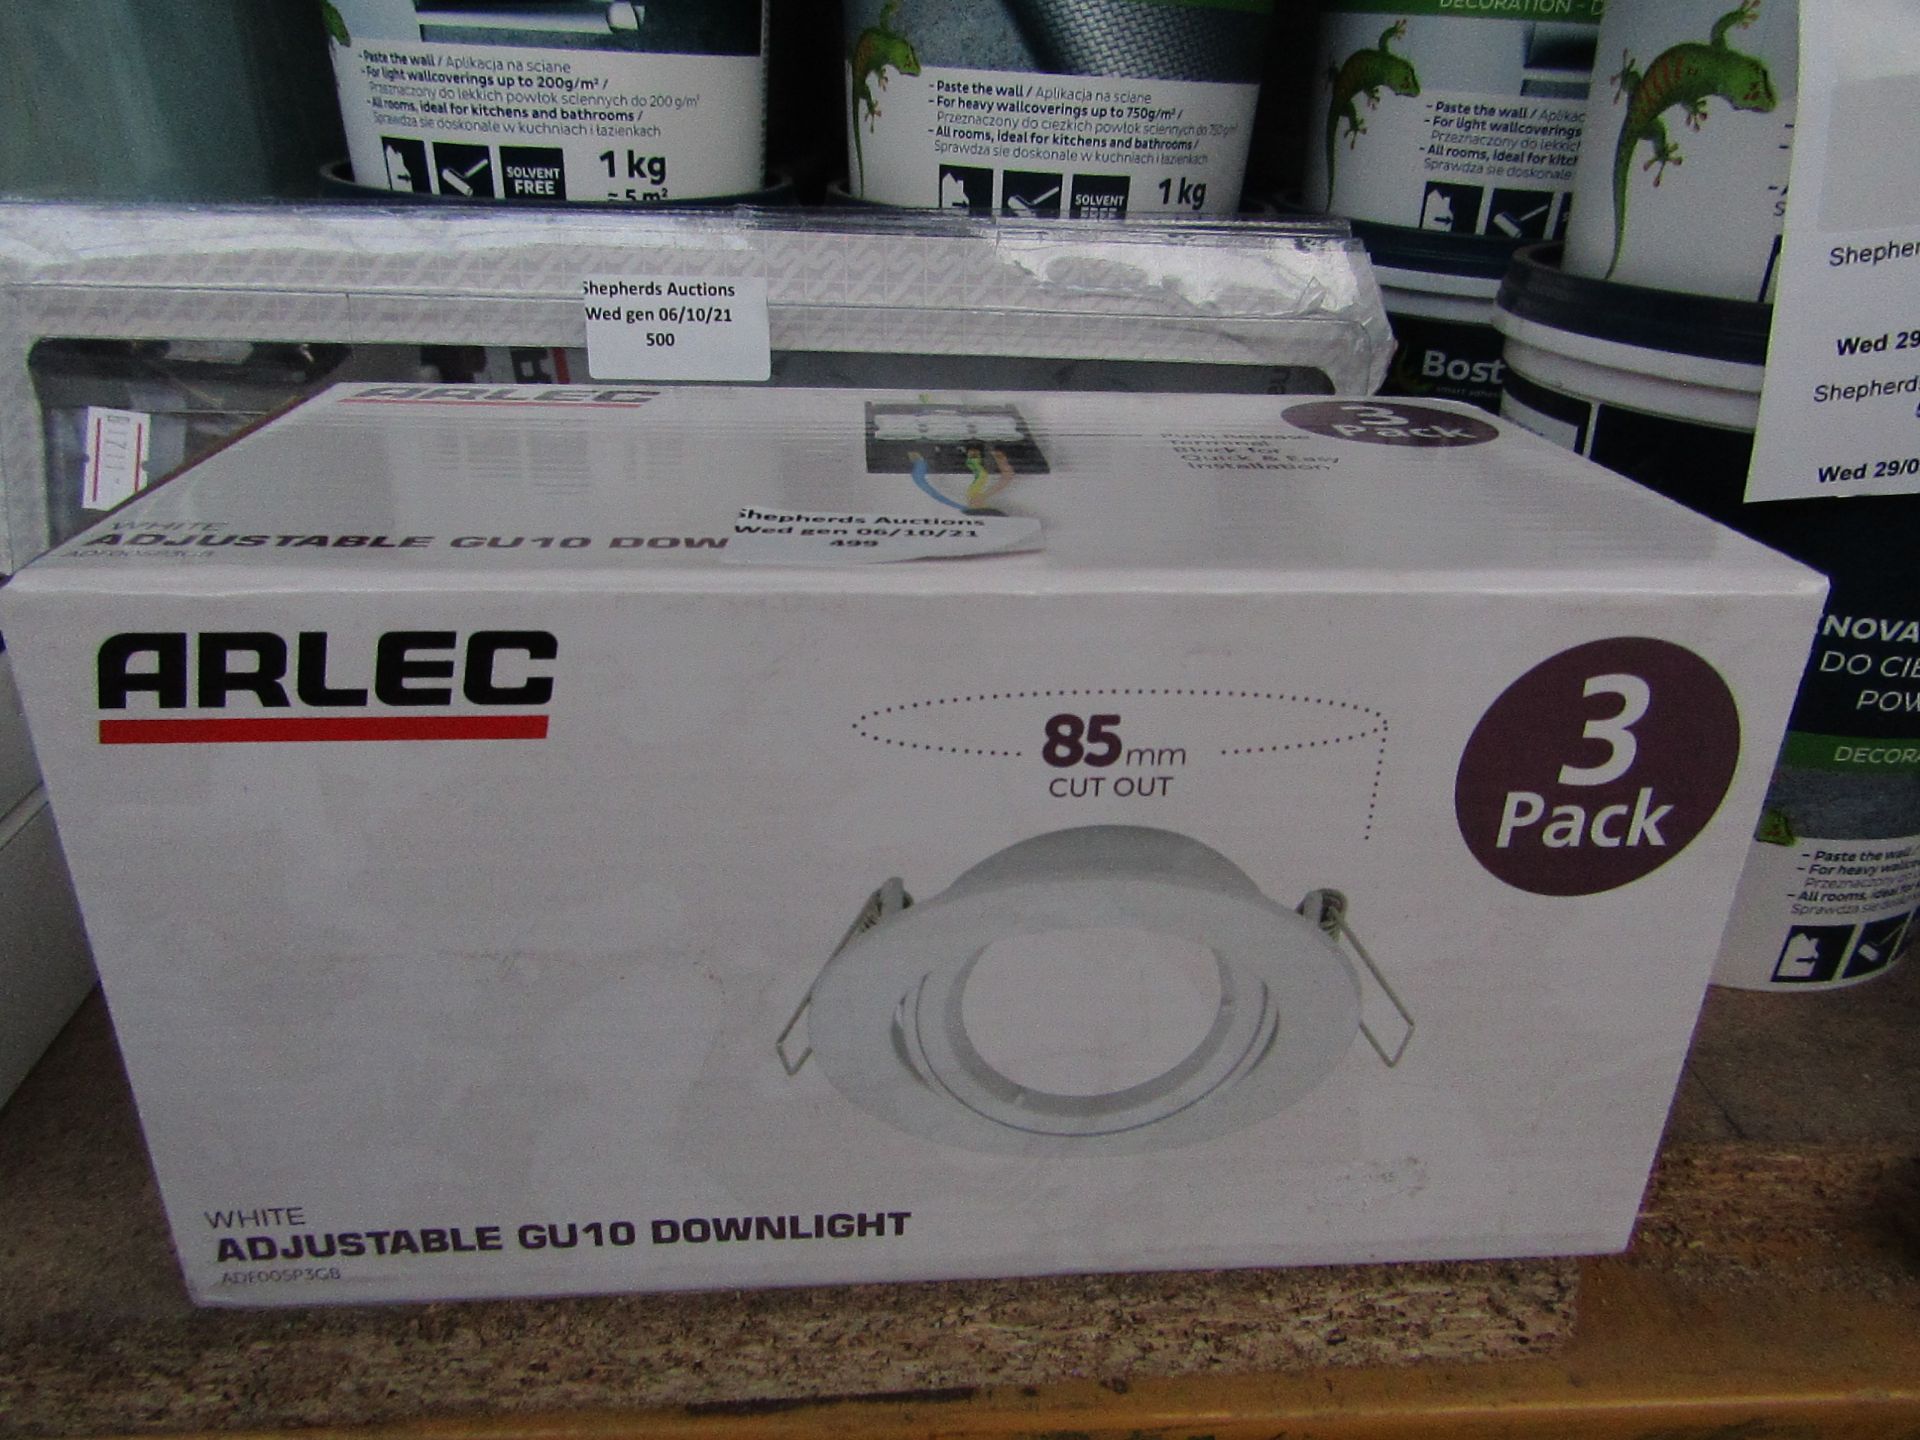 Arlec - White Adjustable GU10 Downlight (3 Pack) - Unchecked & Boxed.